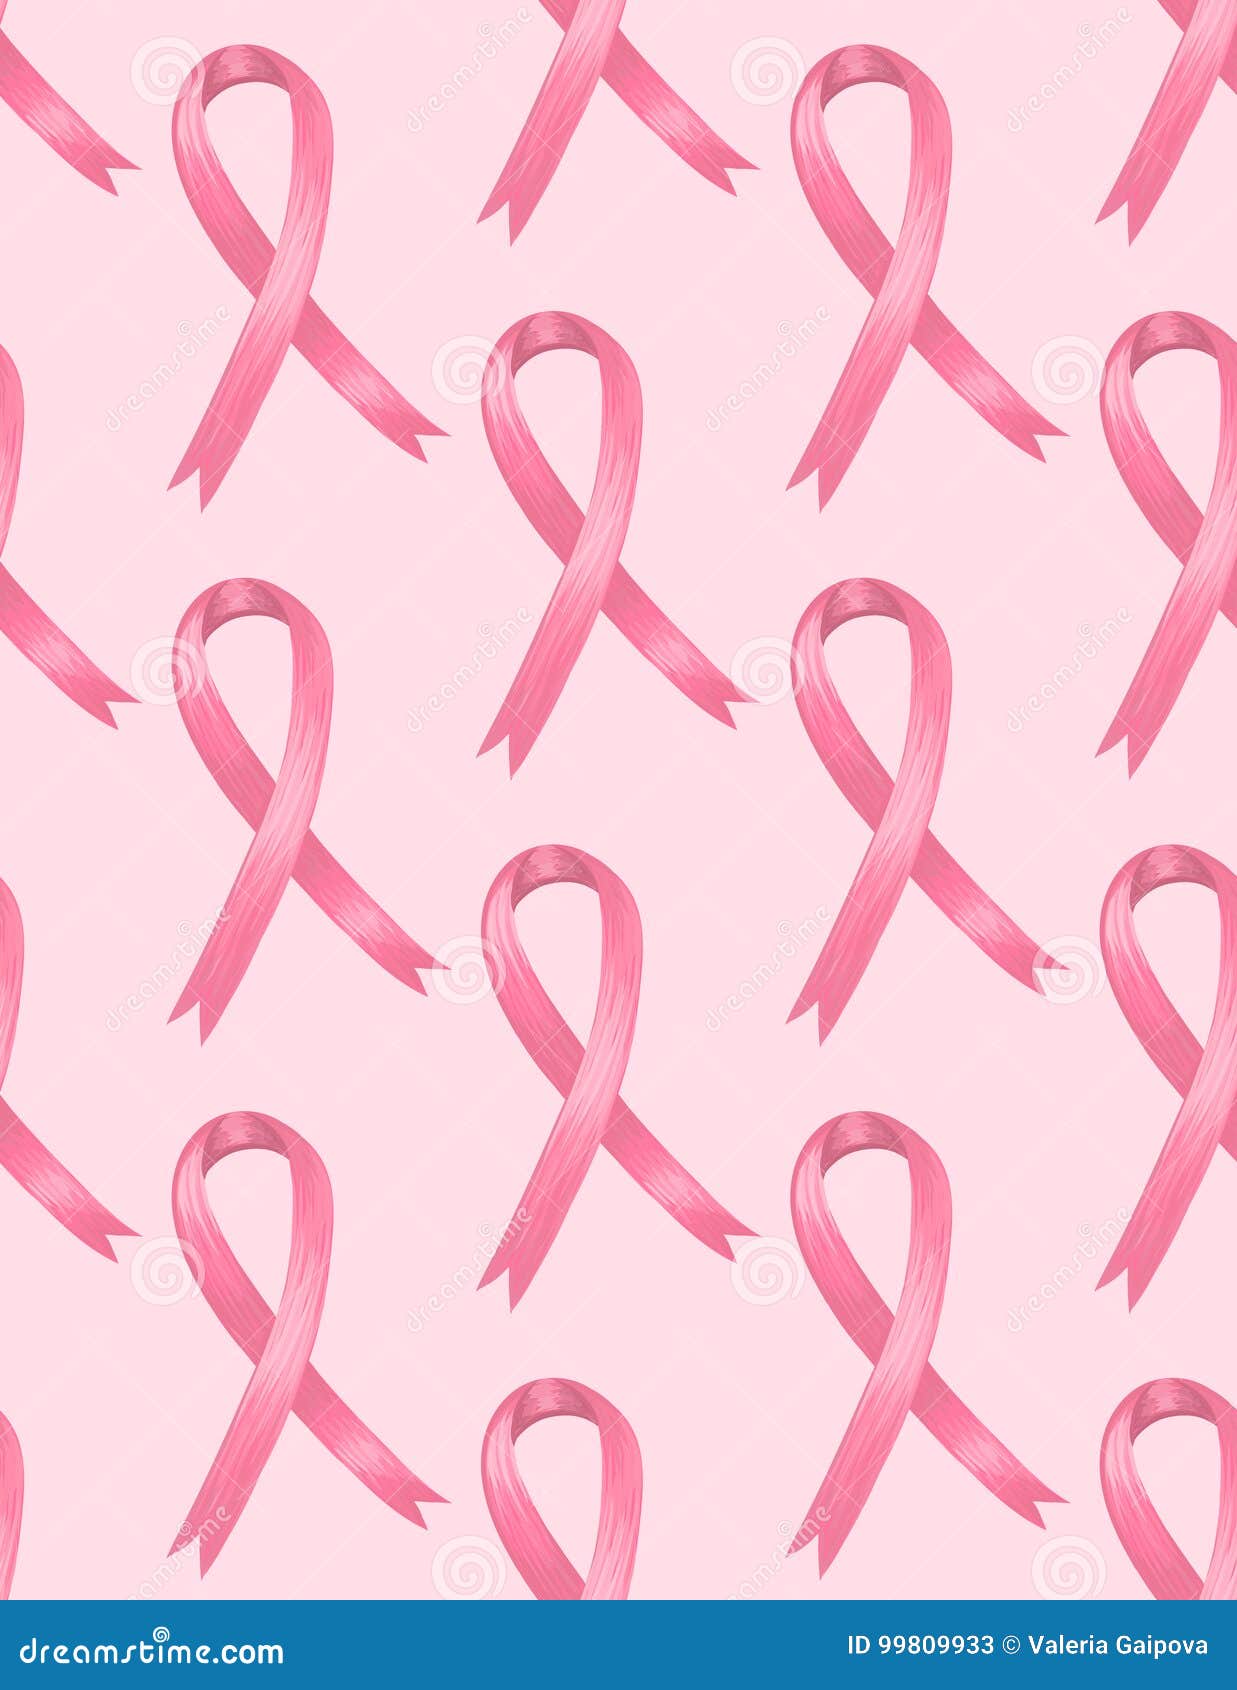 37600 Cancer Ribbon Stock Photos Pictures  RoyaltyFree Images  iStock   Cancer ribbon icon All color cancer ribbon Awareness ribbon